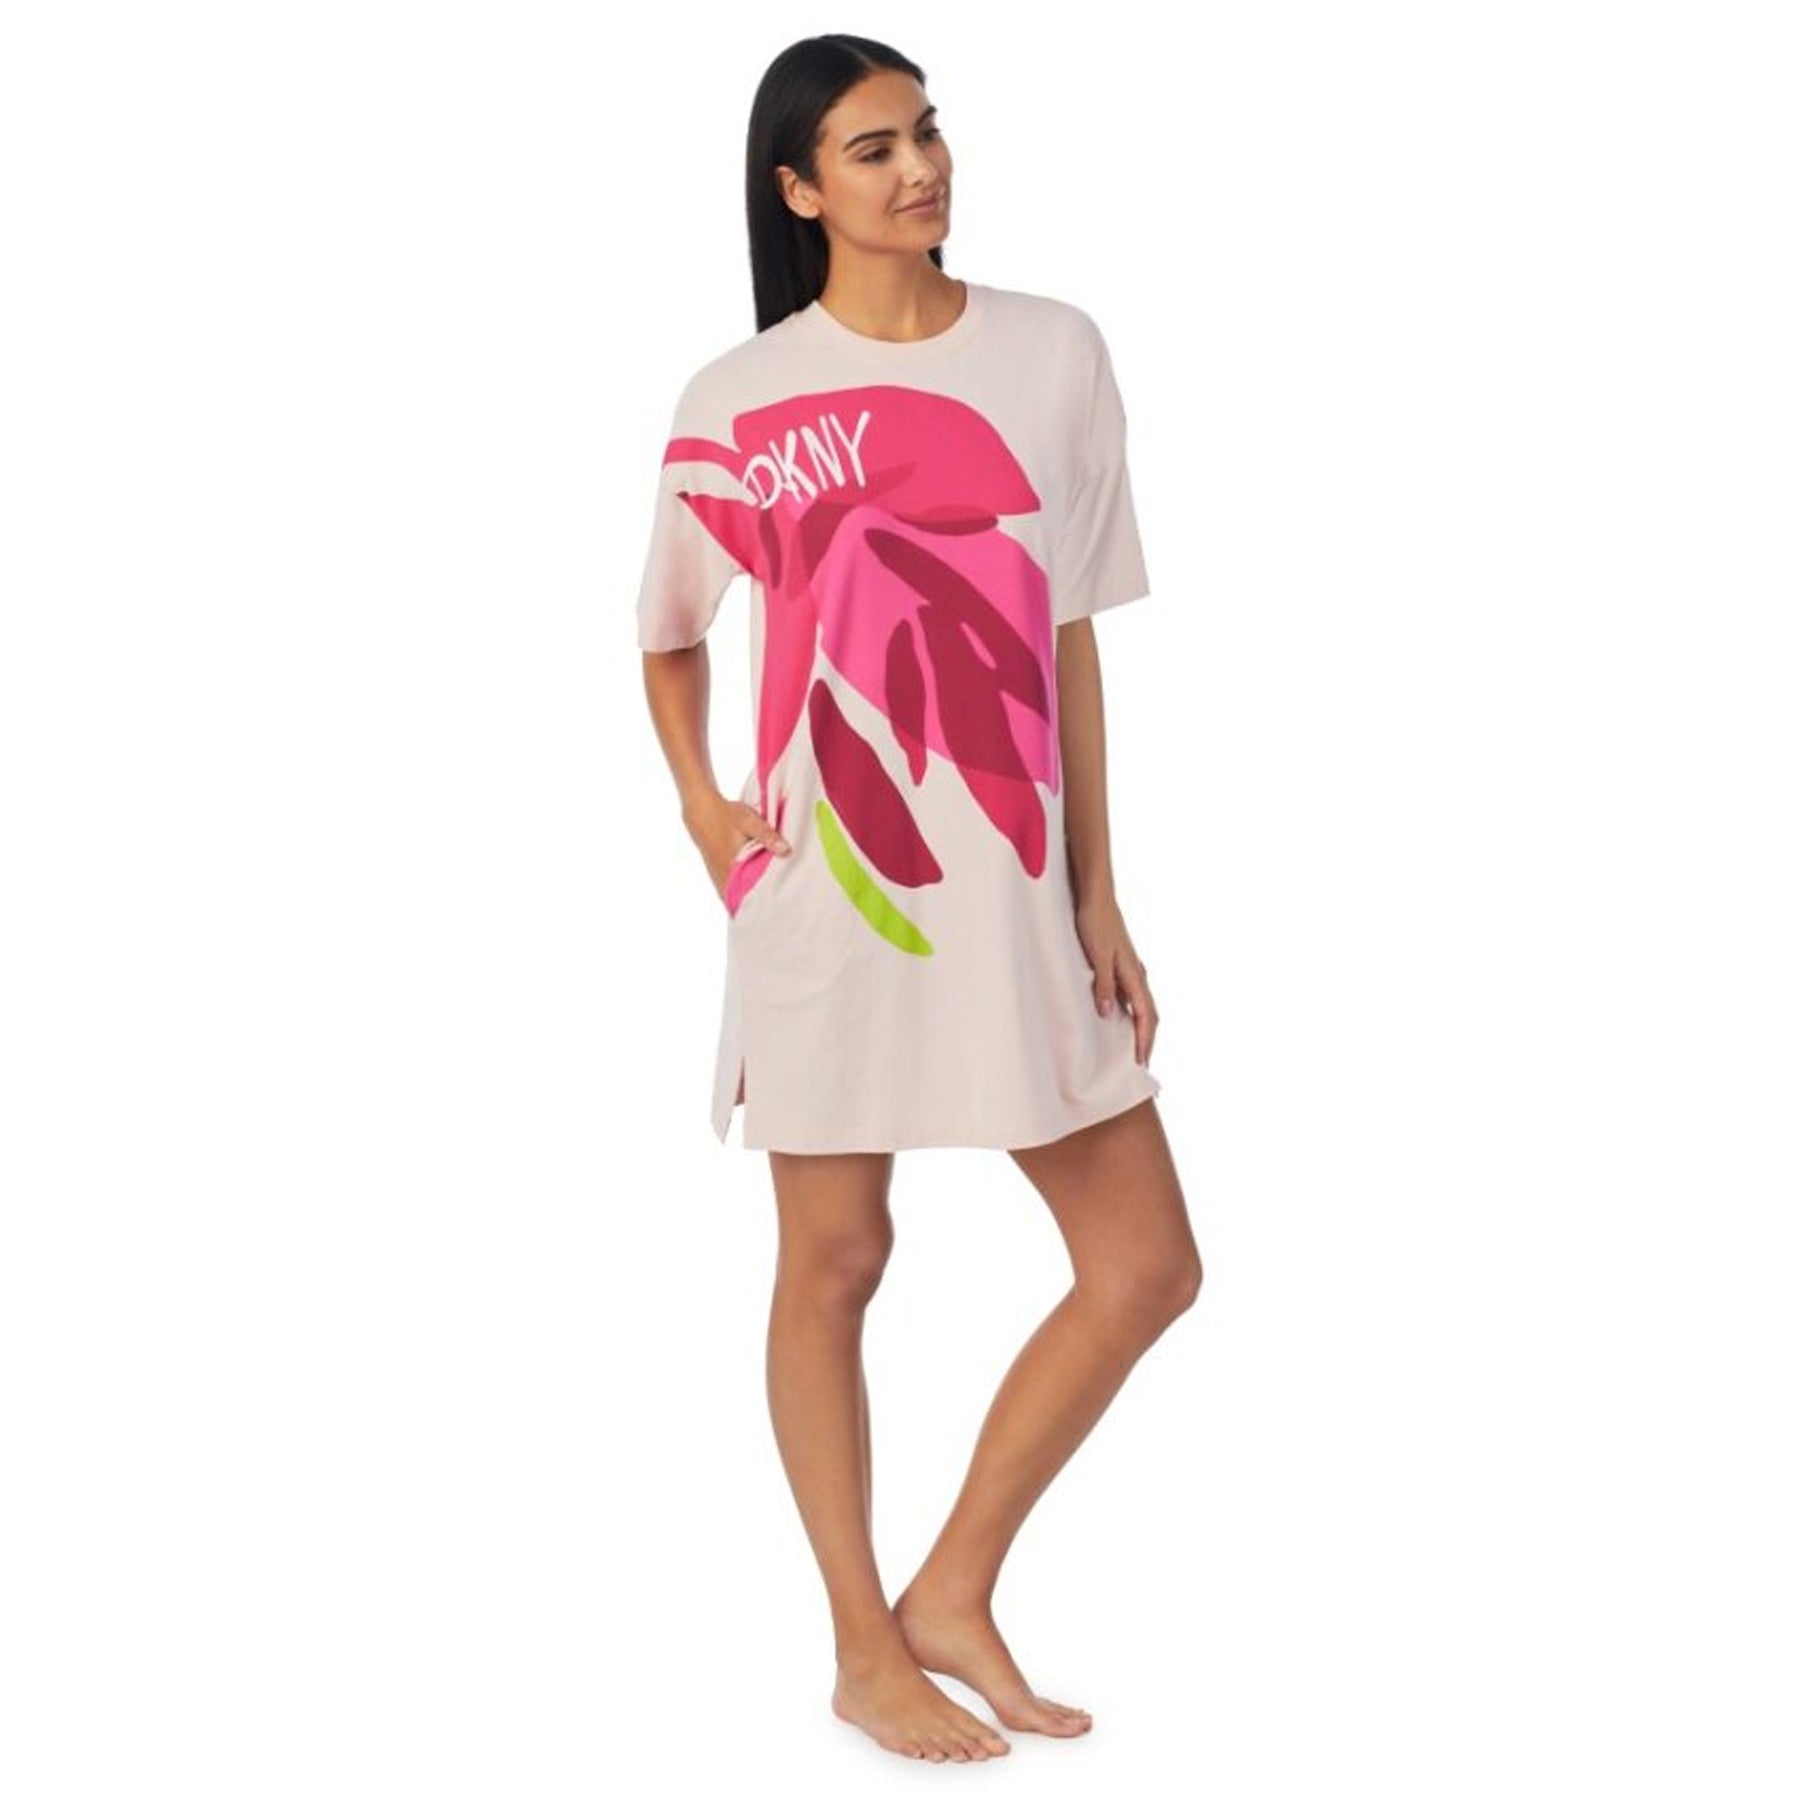 DKNY Upbeat Perspective Nightshirt